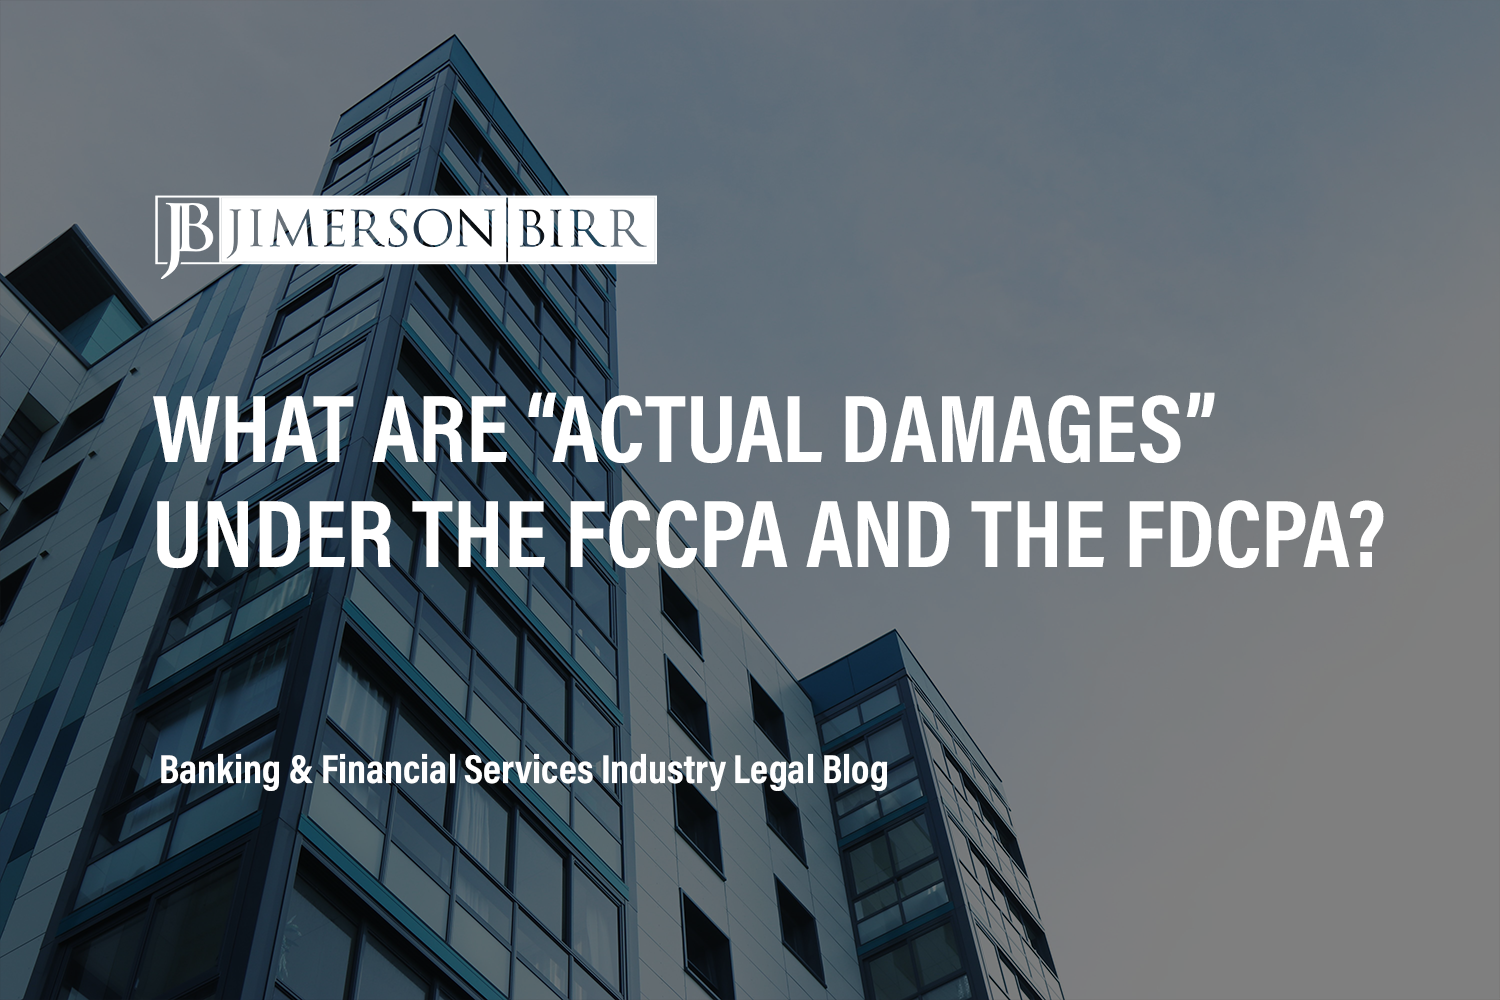 What Are “Actual Damages” Under the FCCPA and the FDCPA?